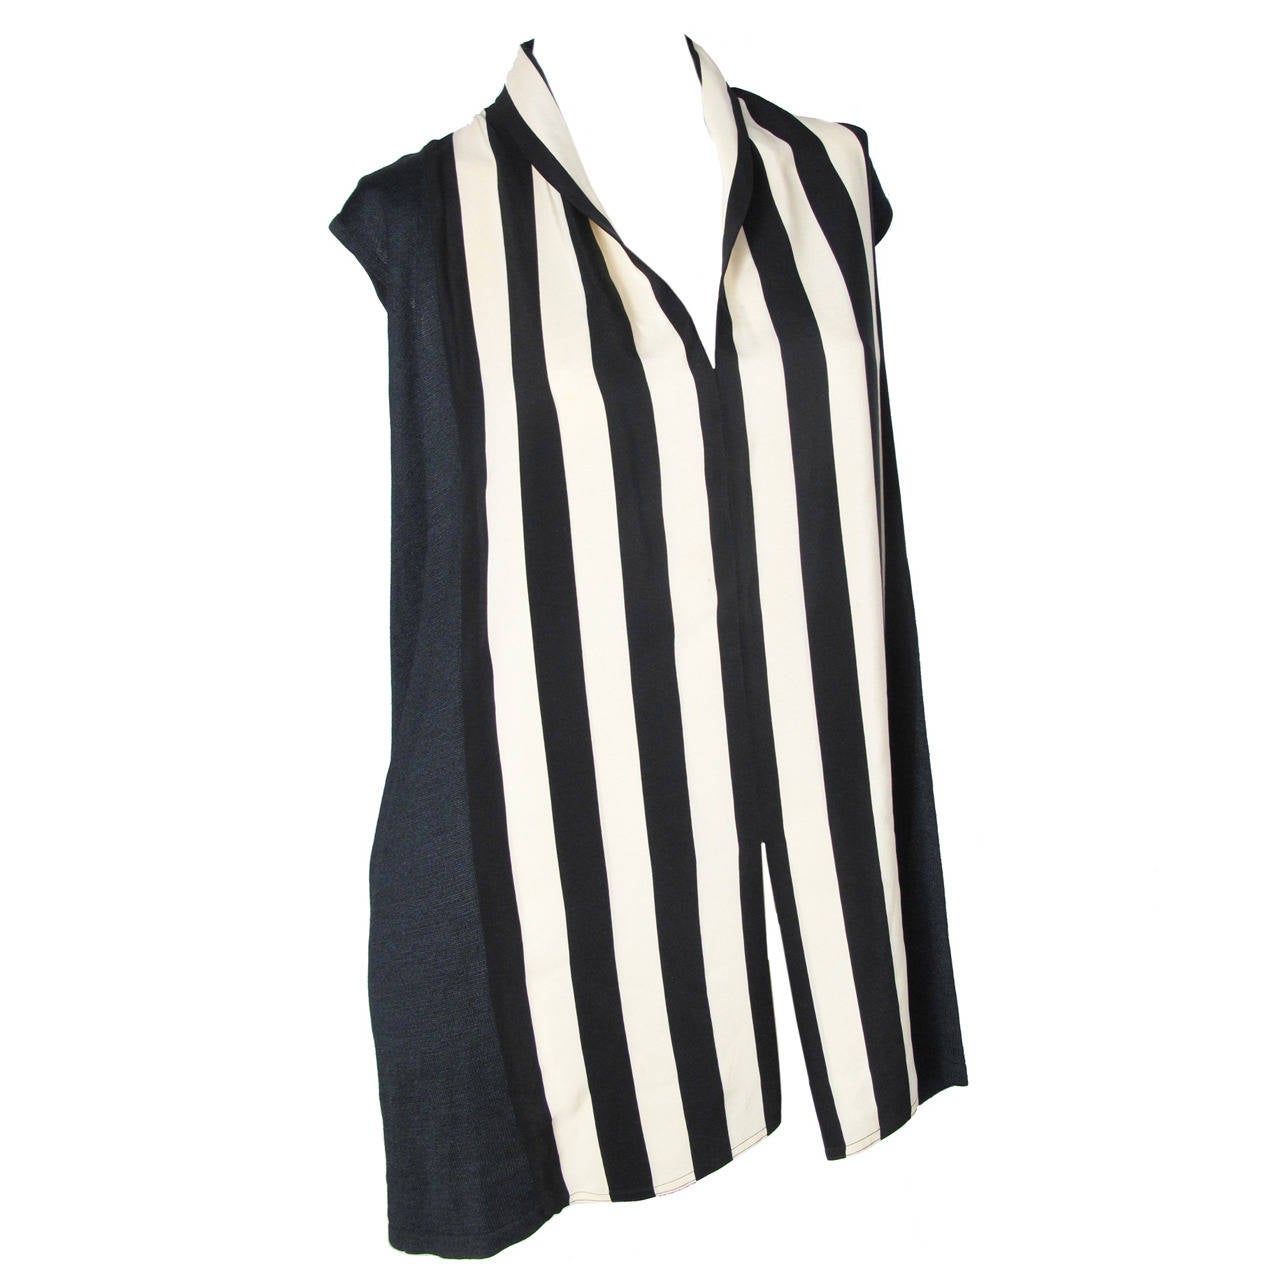 Gianfranco Ferre Striped Blouse at 1stdibs